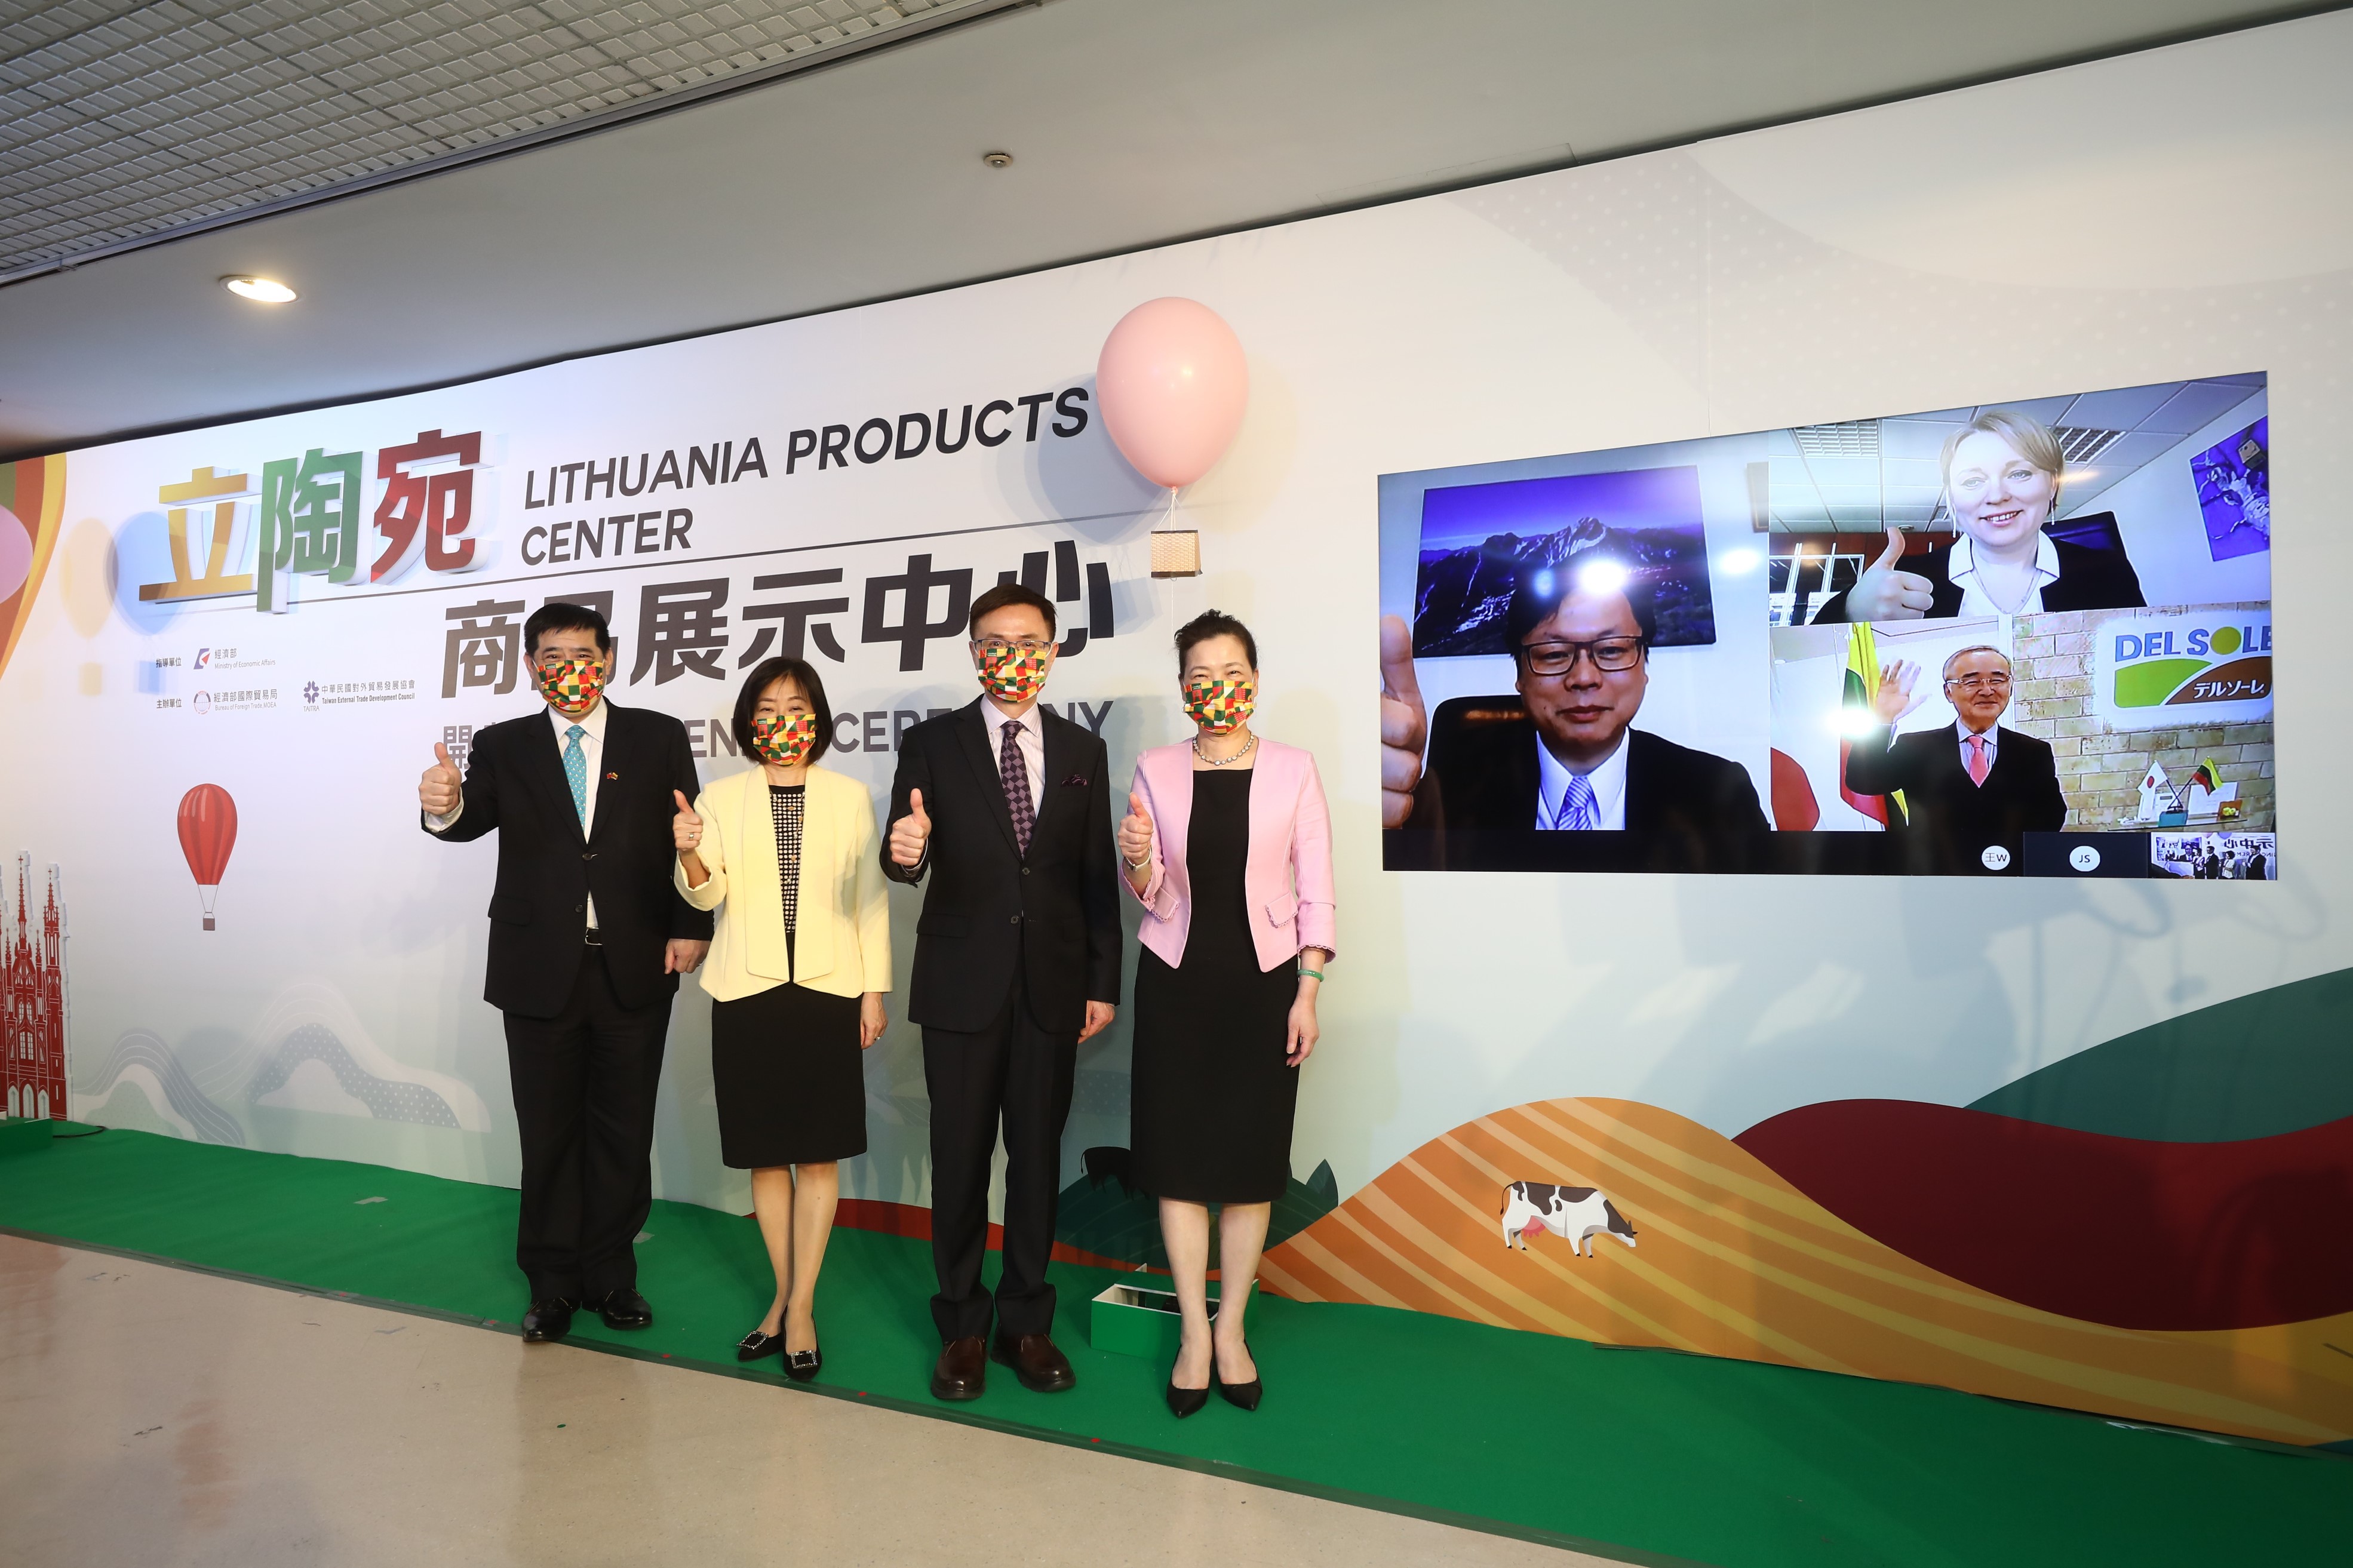 Taiwan and Japan simultaneously held Lithuanian products promotion events to show firm triple partnership